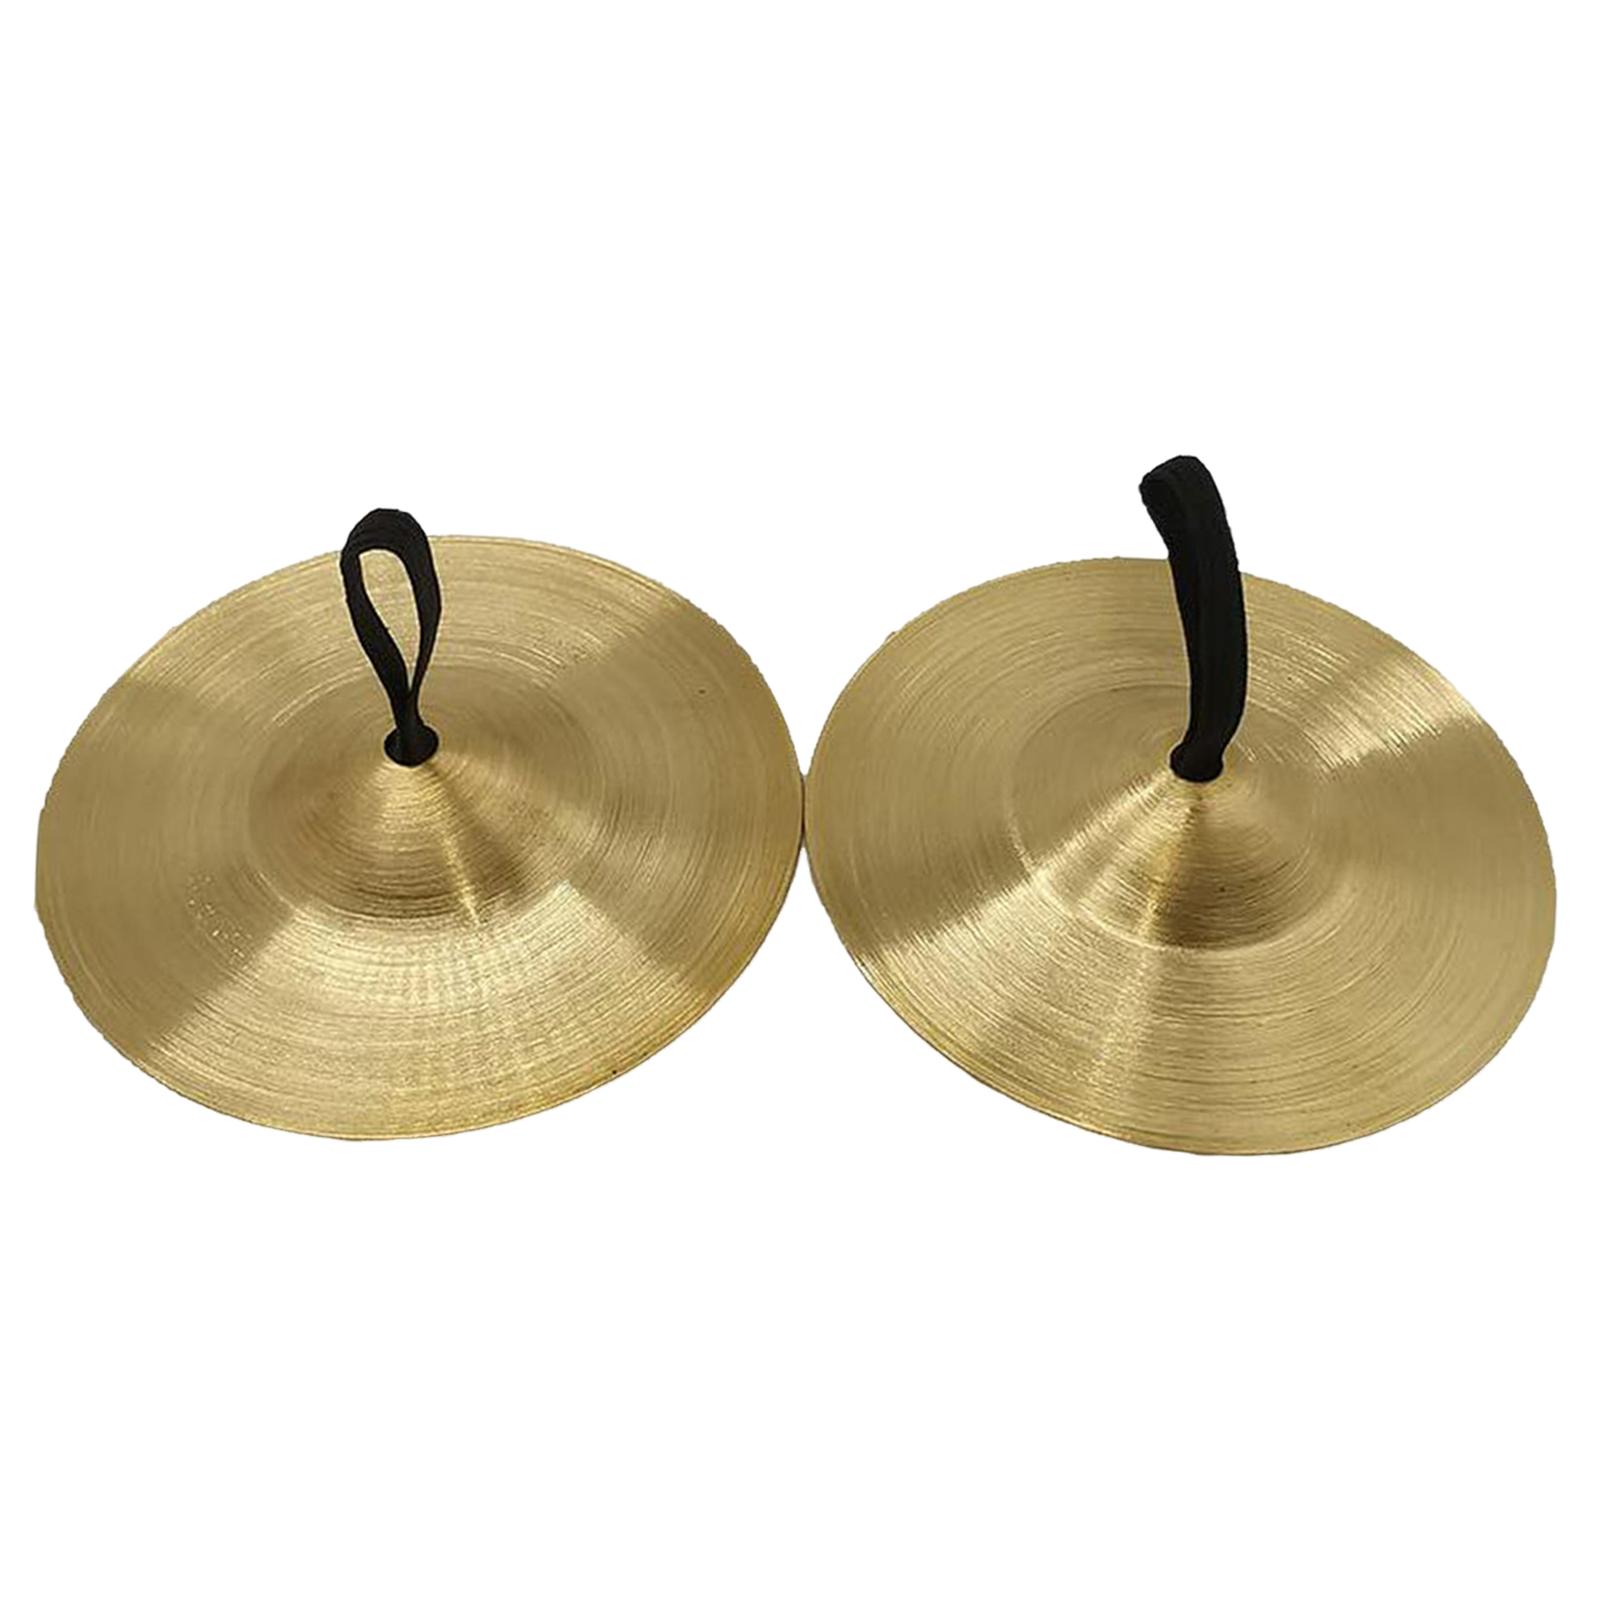 Hand Cymbals Kids Handheld Cymbals Musical Instrument copper Crash Cymbal for Kids ,Finger Cymbals for Activity, Events, Chorus, Presentations 9cm - image 1 of 8